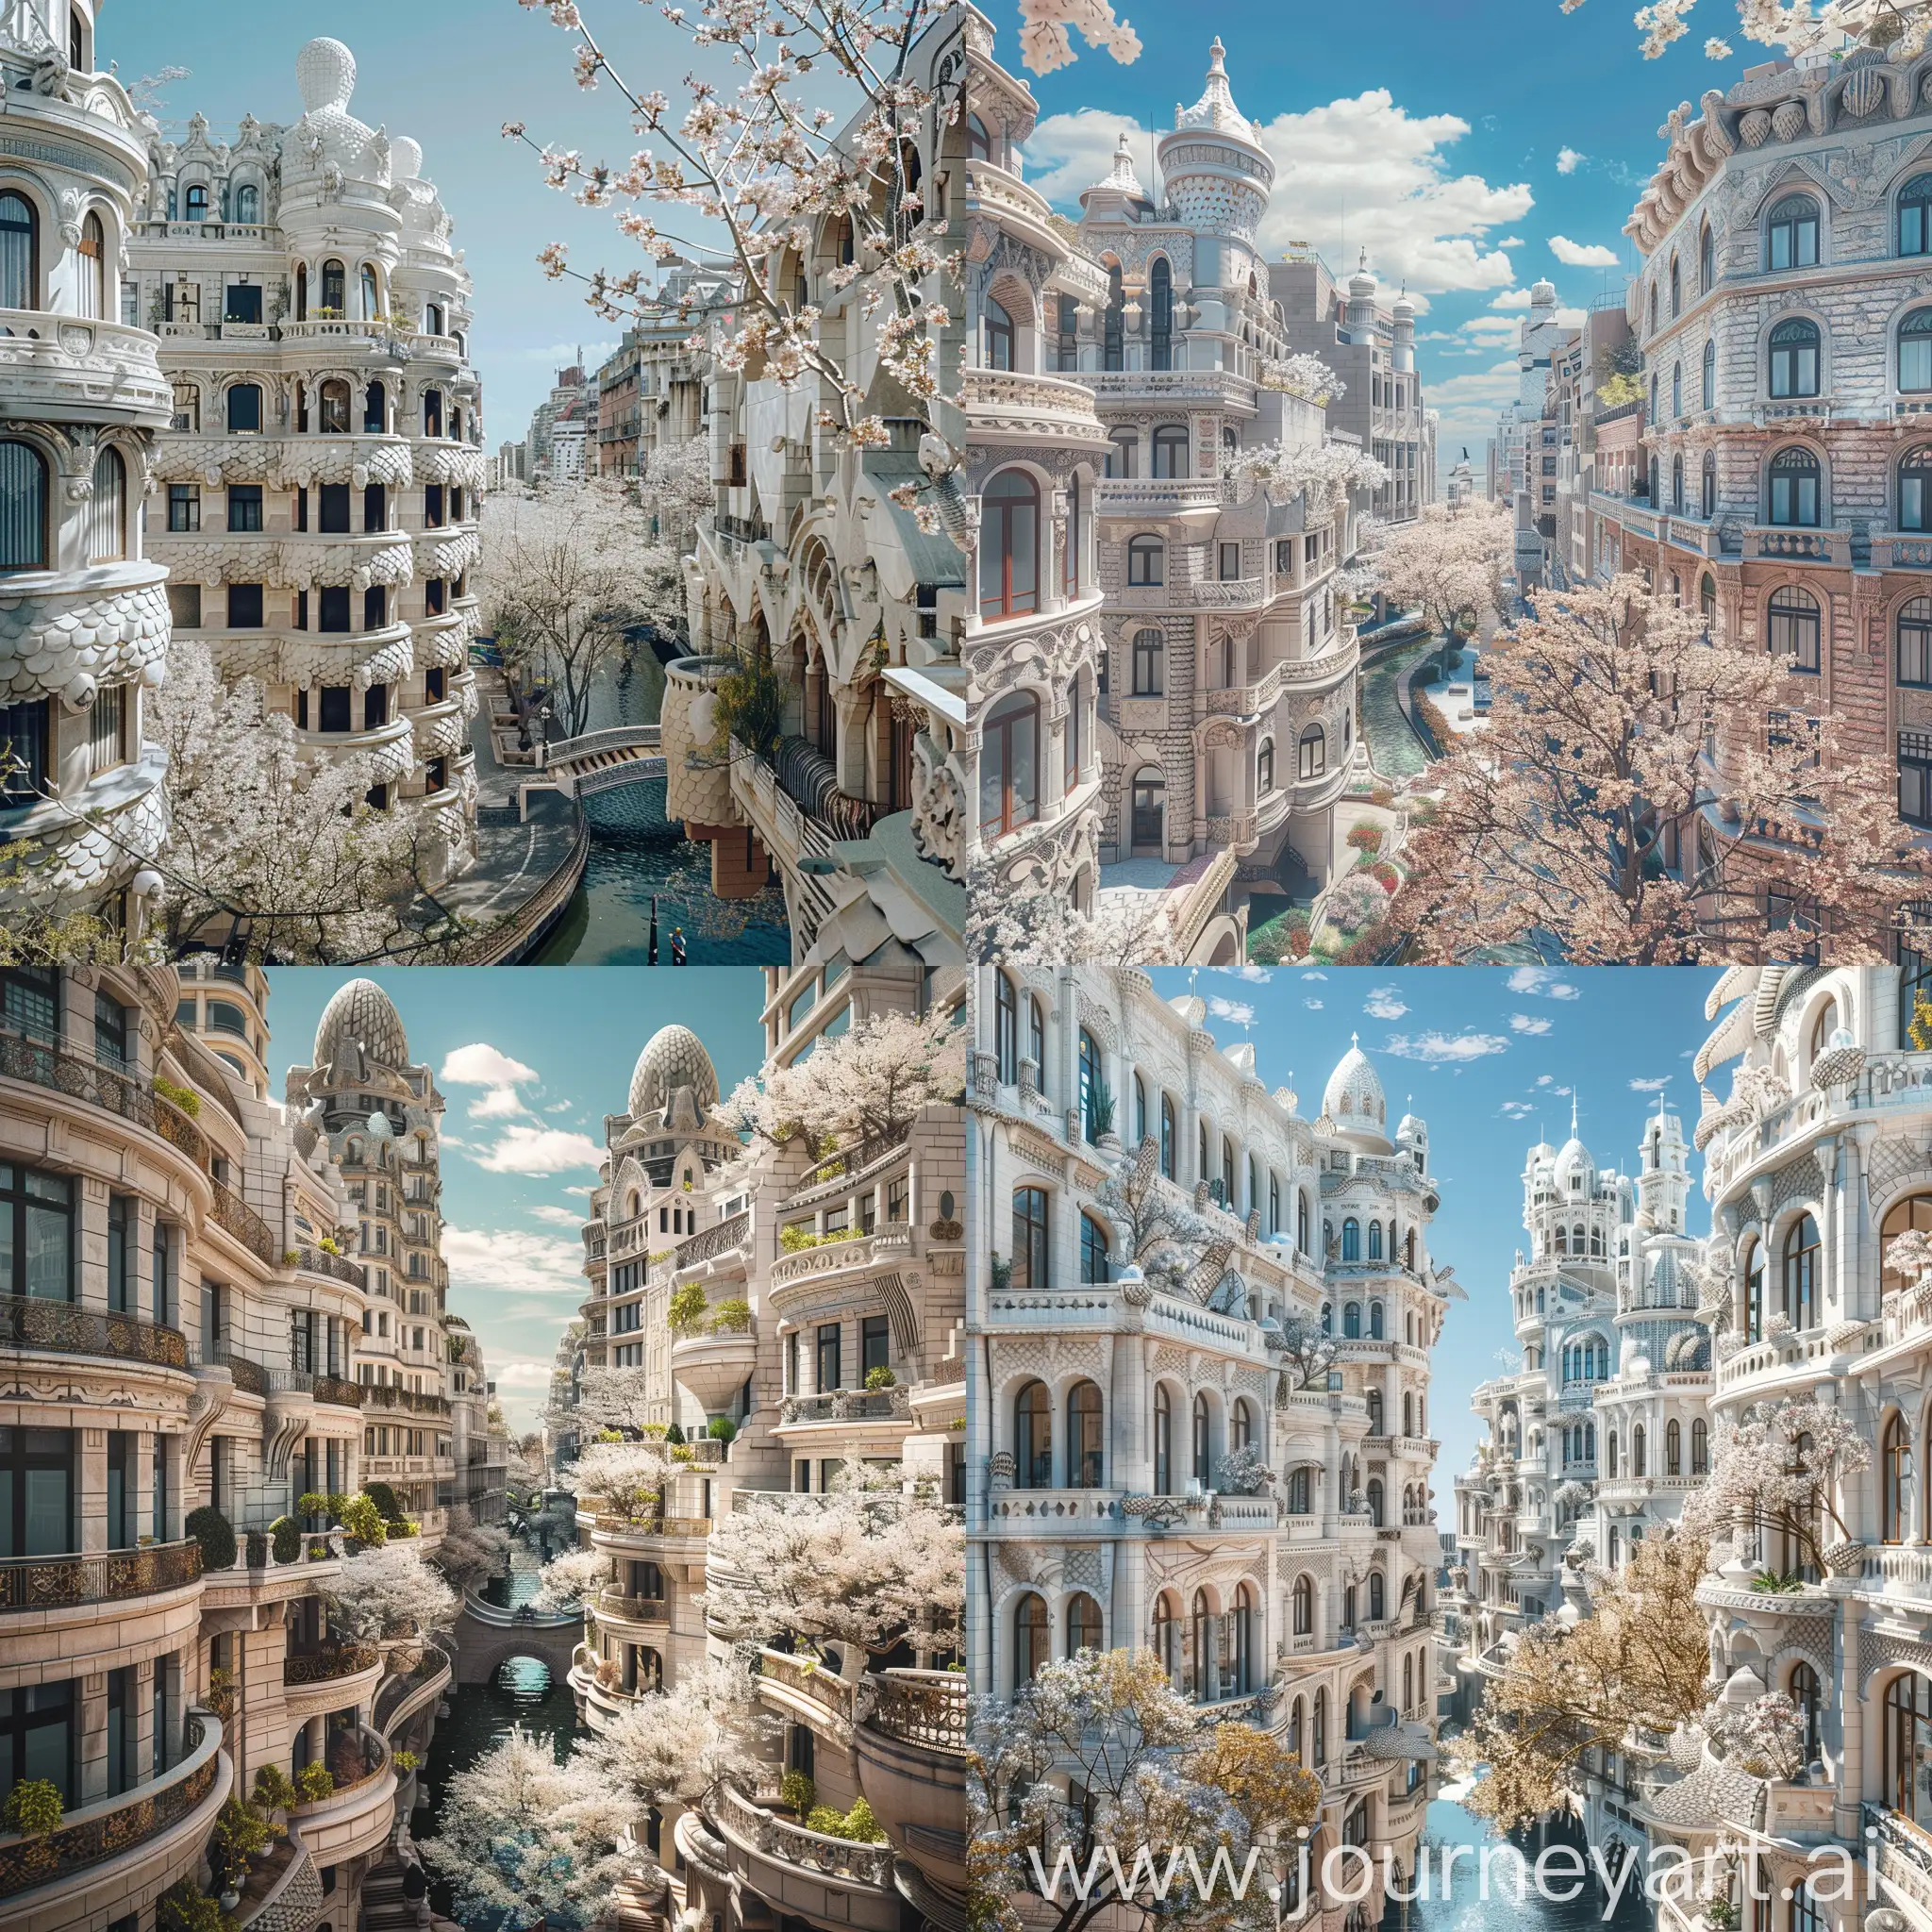 Beautiful futuristic metropolis in an alternate timeline where all buildings retain traditional elements, ornate travertine architecture with scale-like patterns on facades and blossoming trees, monumental terraced buildings, canals, Buenos Aires vibe, spring, blue sky, photograph